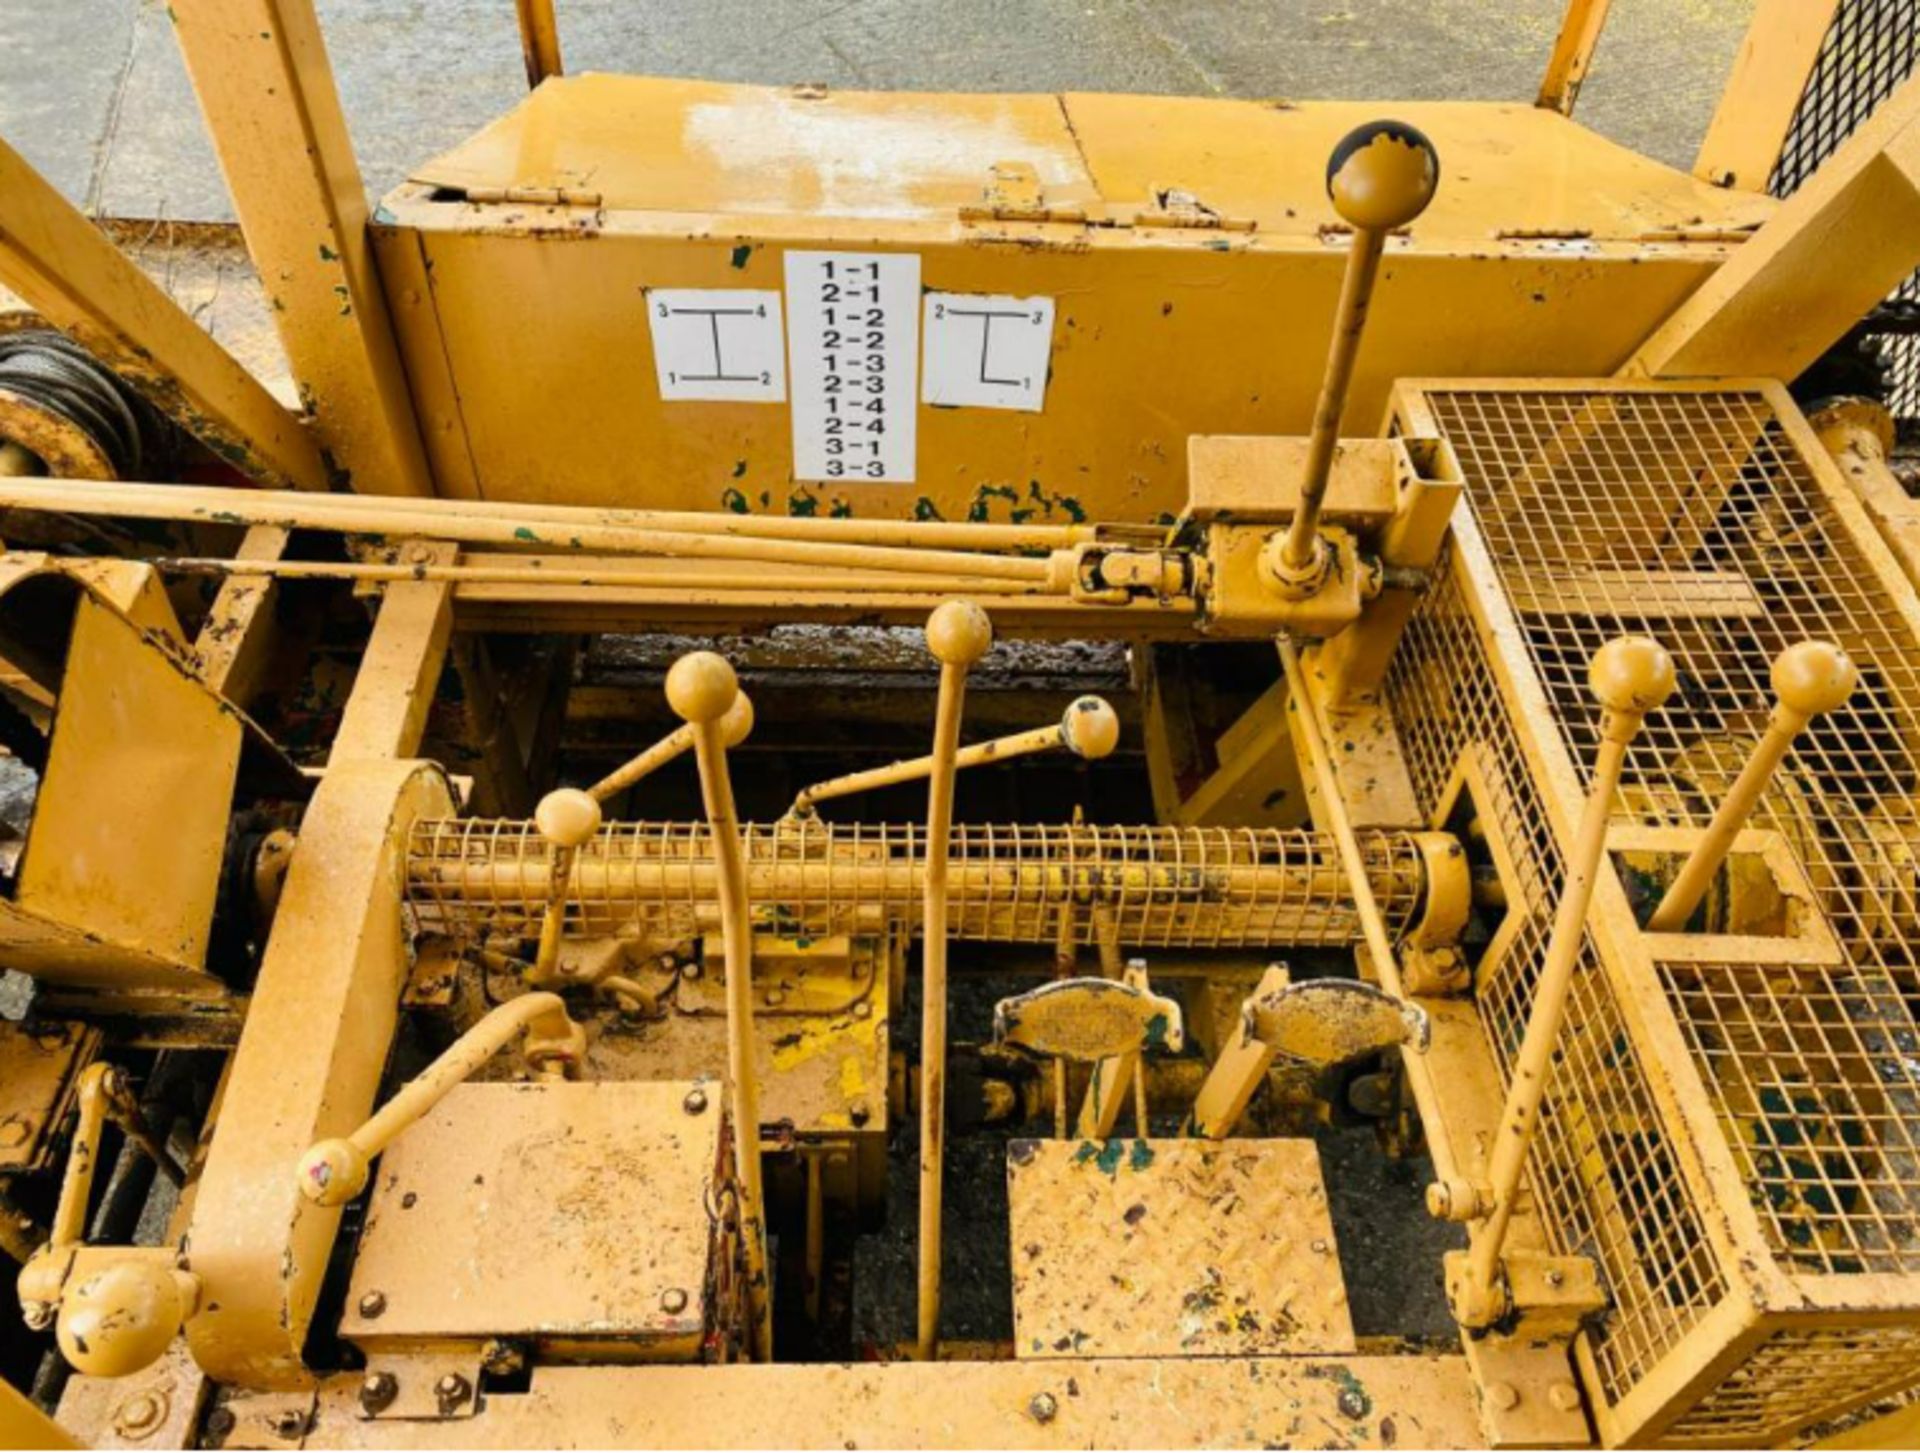 CLEVELAND 320 32" BUCKET WHEEL TRACKED TRENCHER - Image 12 of 15